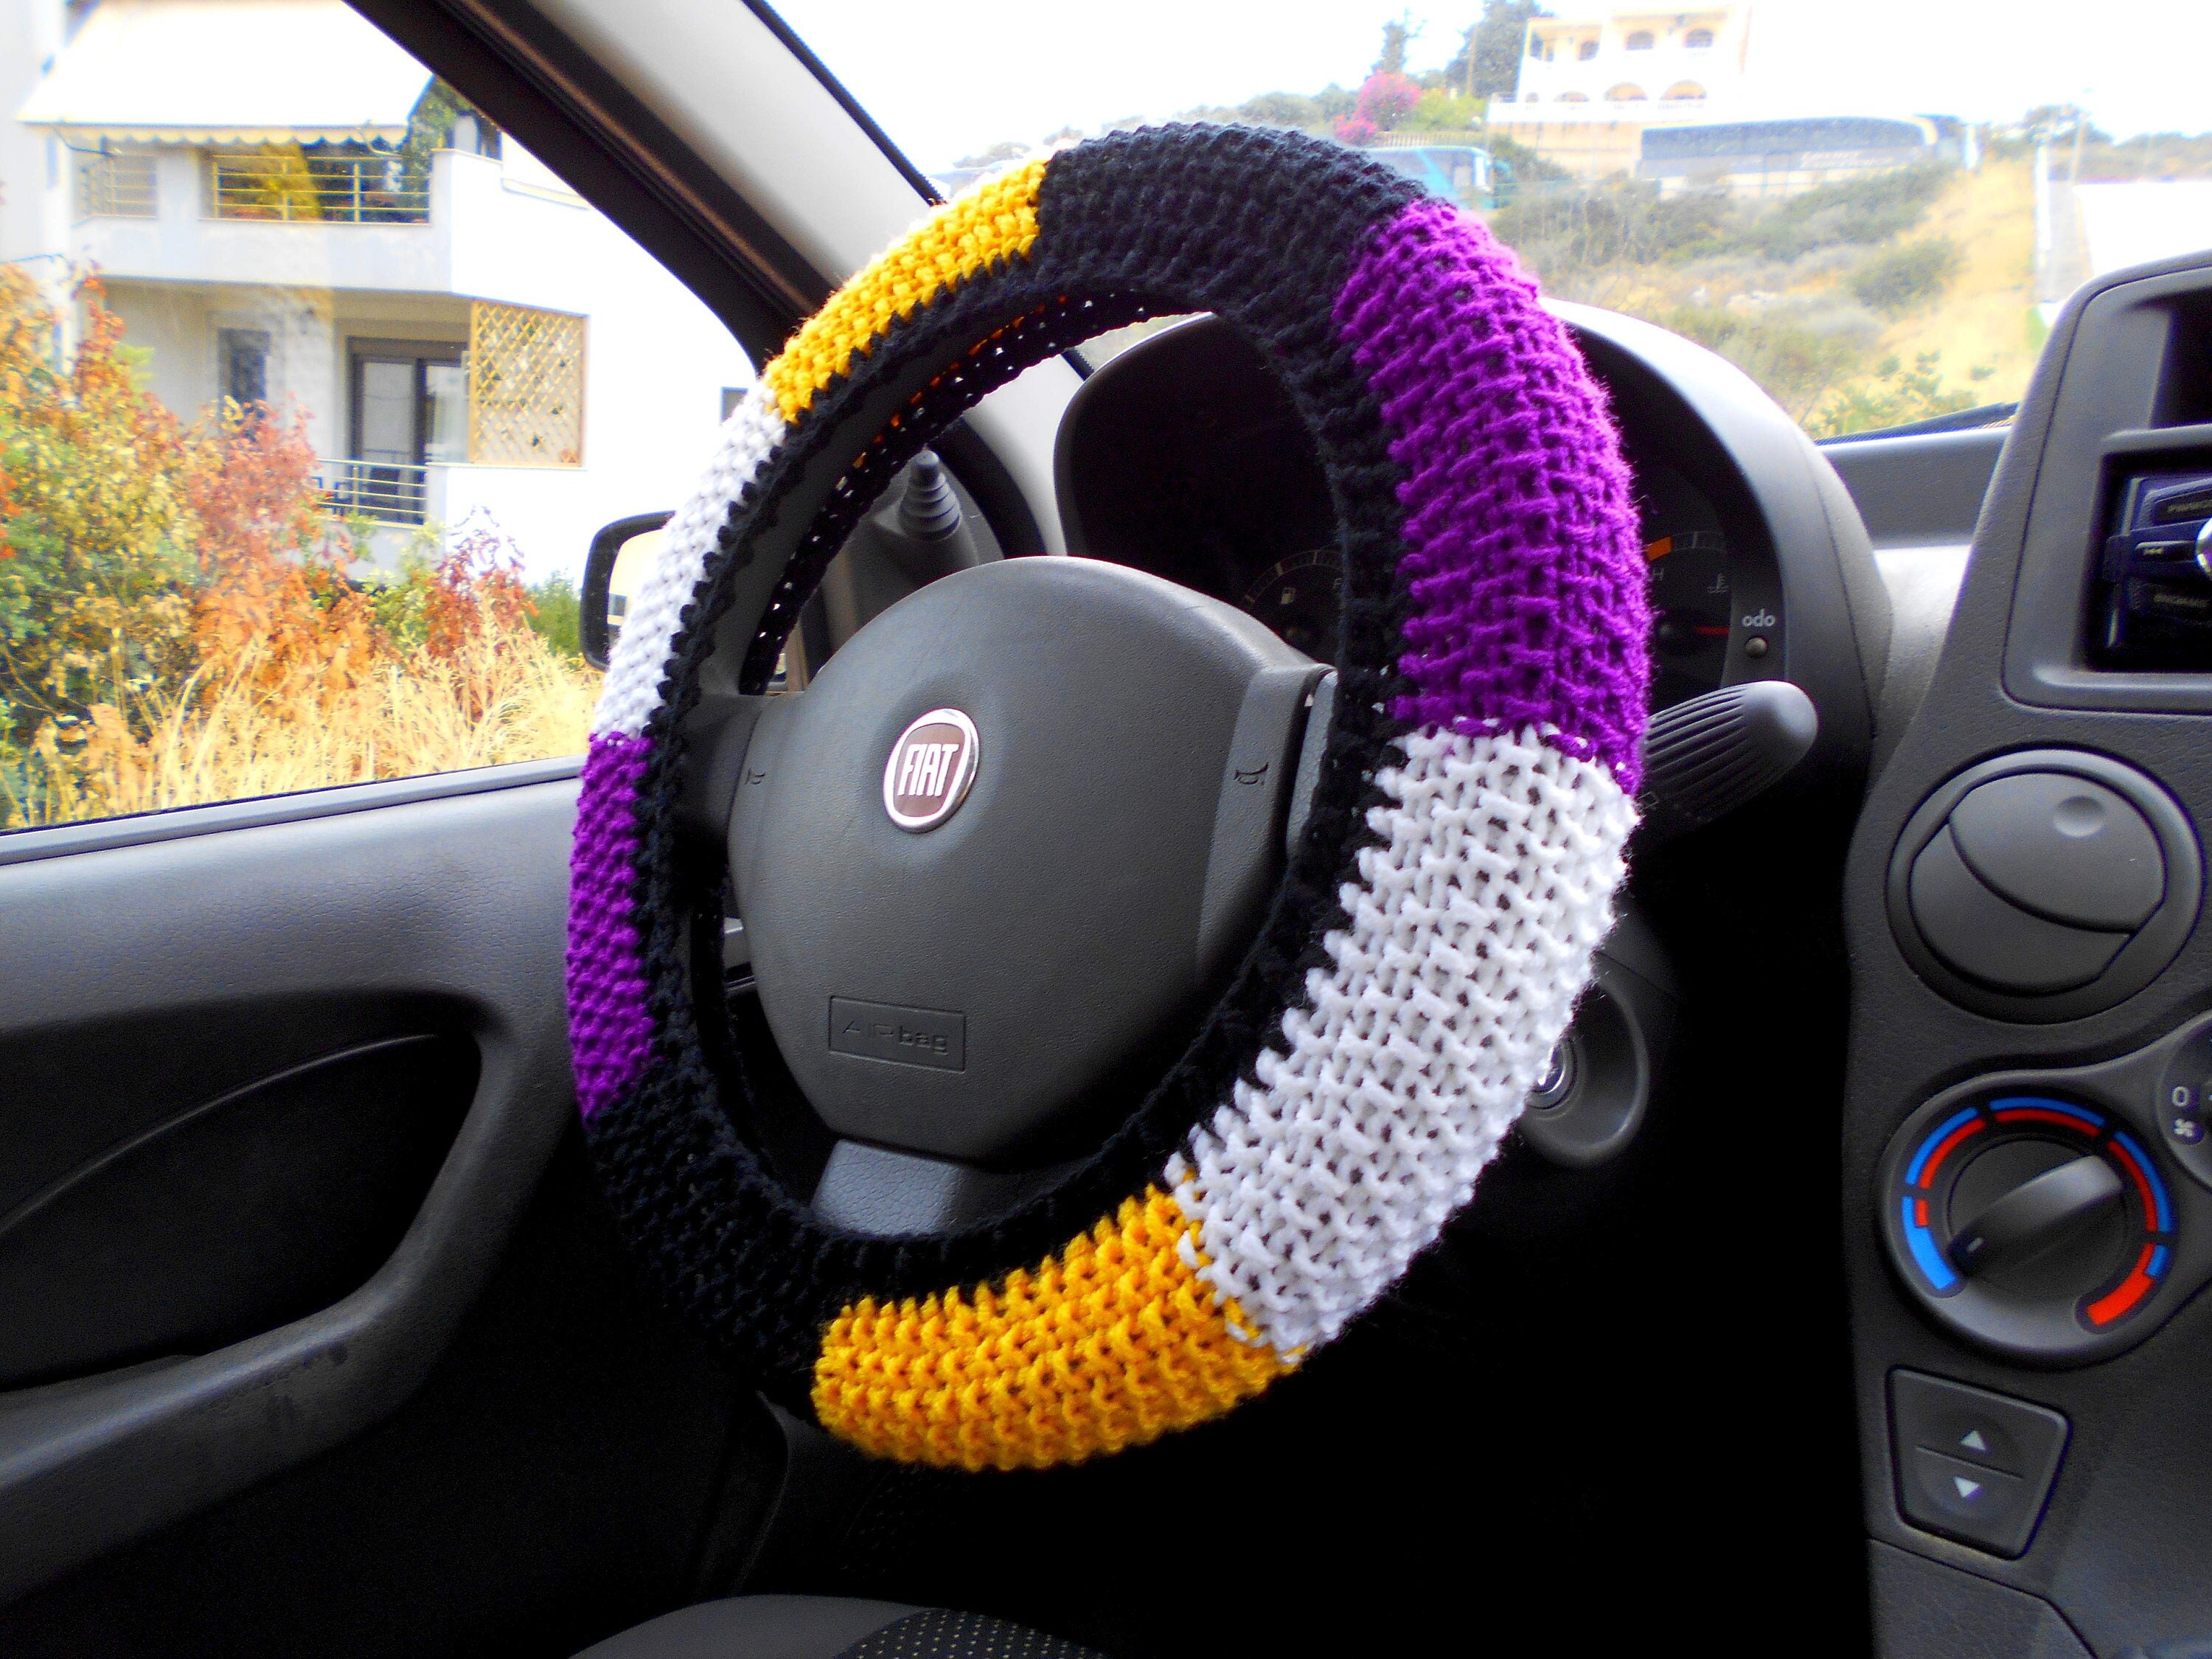 Cute Car Accessories Interior Car Decor Steering Wheel Cover Pansexual Gift  Pride Flags 